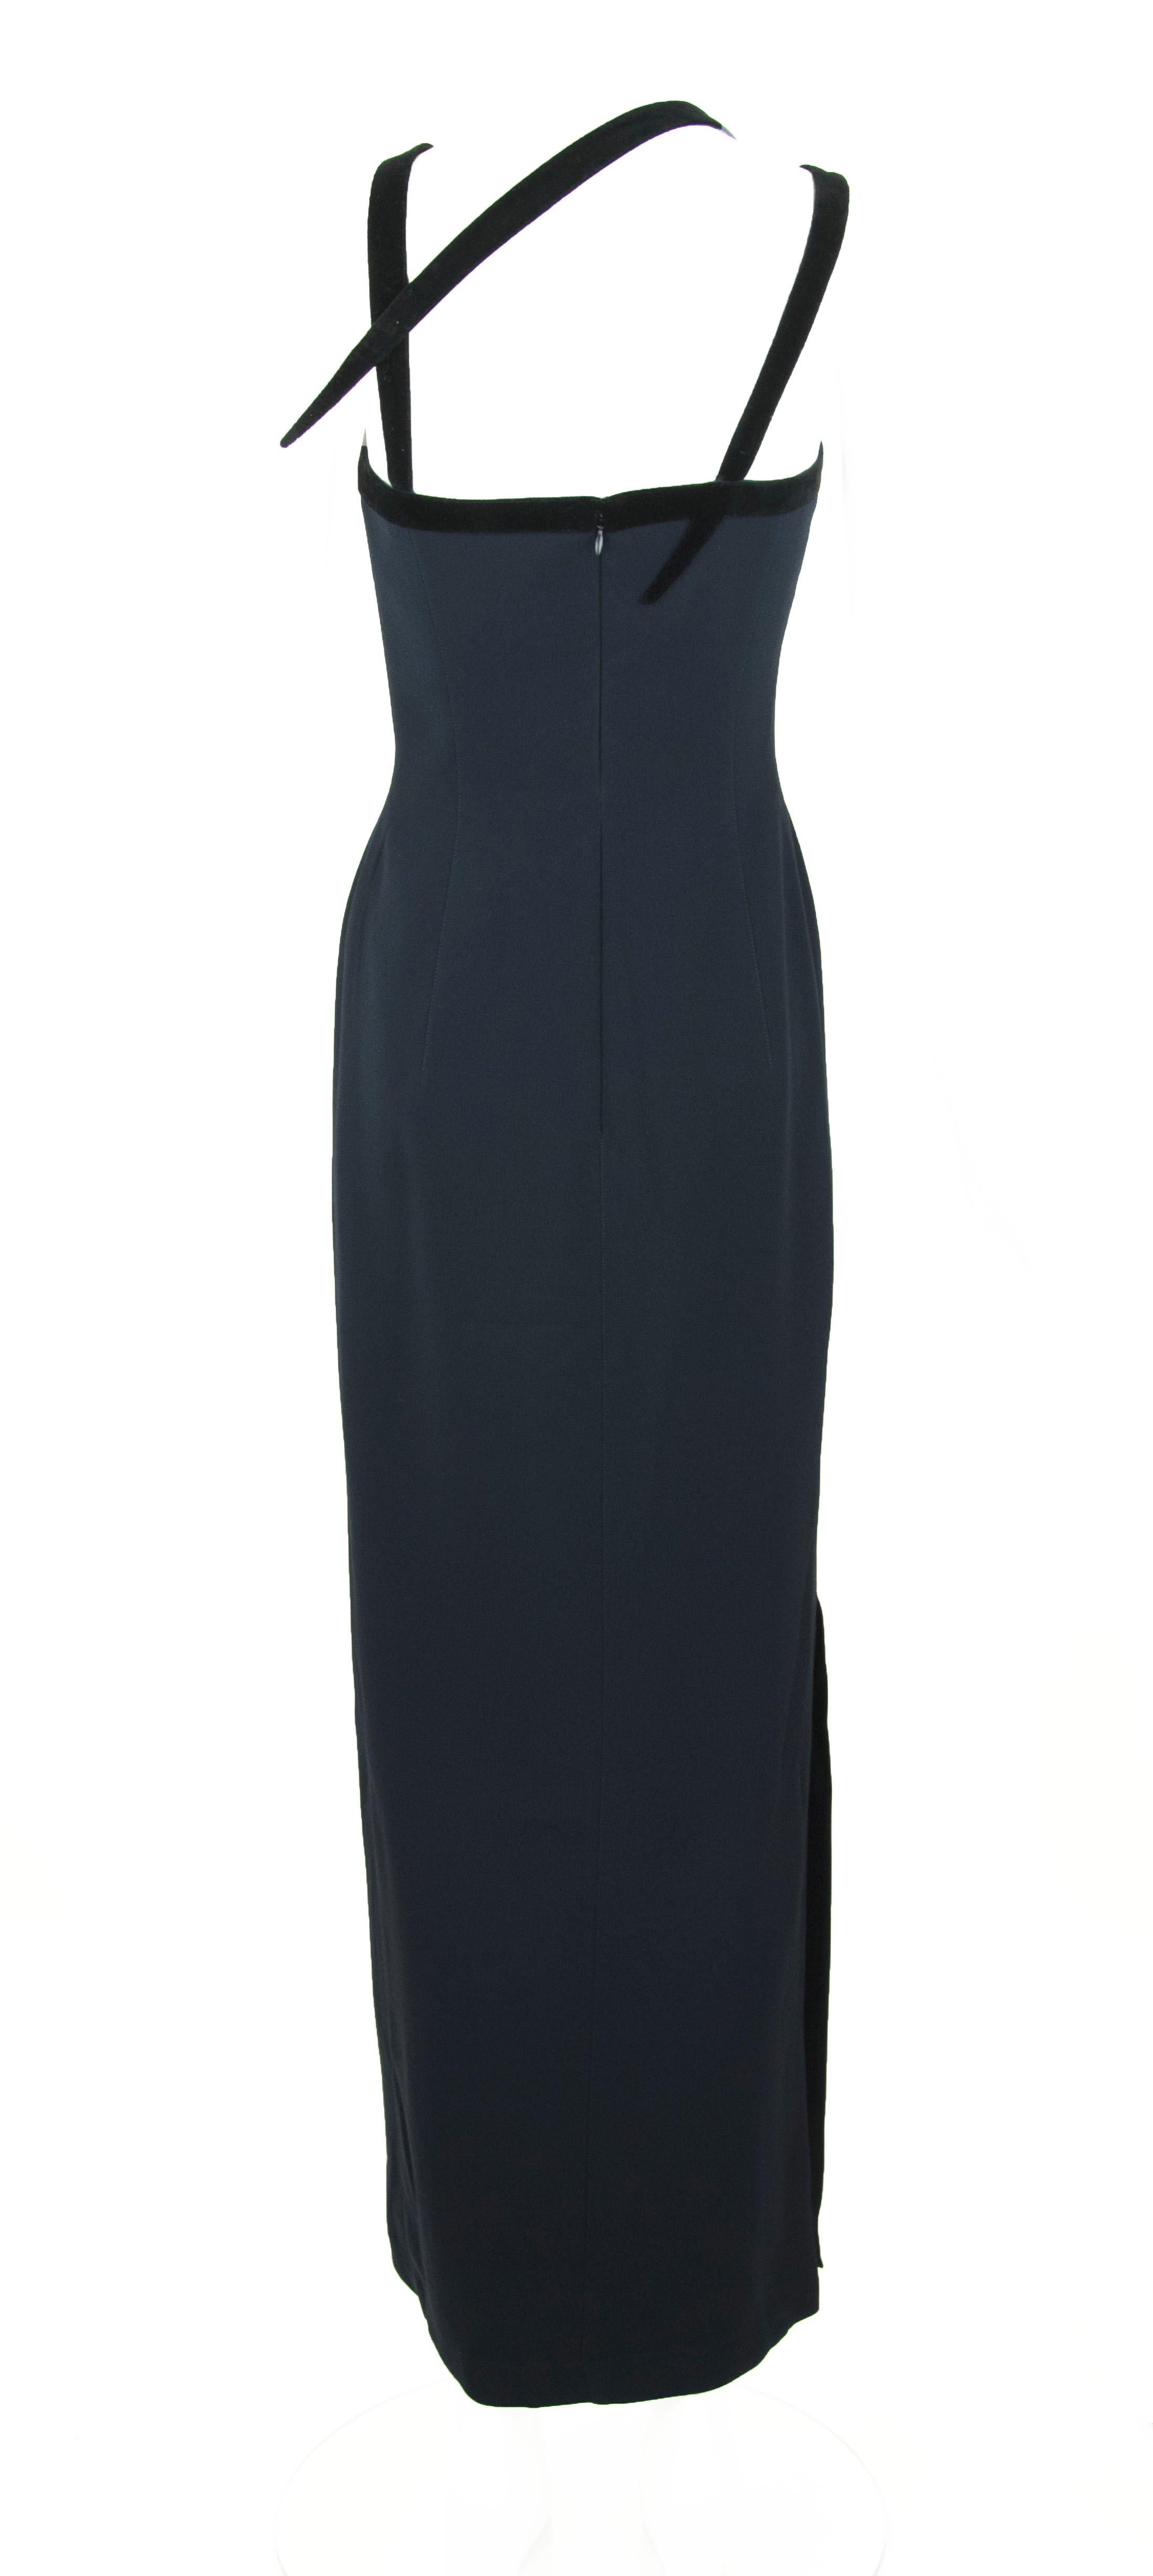 Gorgeous Thierry Mugler navy blue silk gown, perfect for your next black tie event.  Geometric and asymmetrical black velvet straps add interesting detail to this dress.  

Size: FR 36

Condition: New with tags

Care: Dry clean only

Made in France